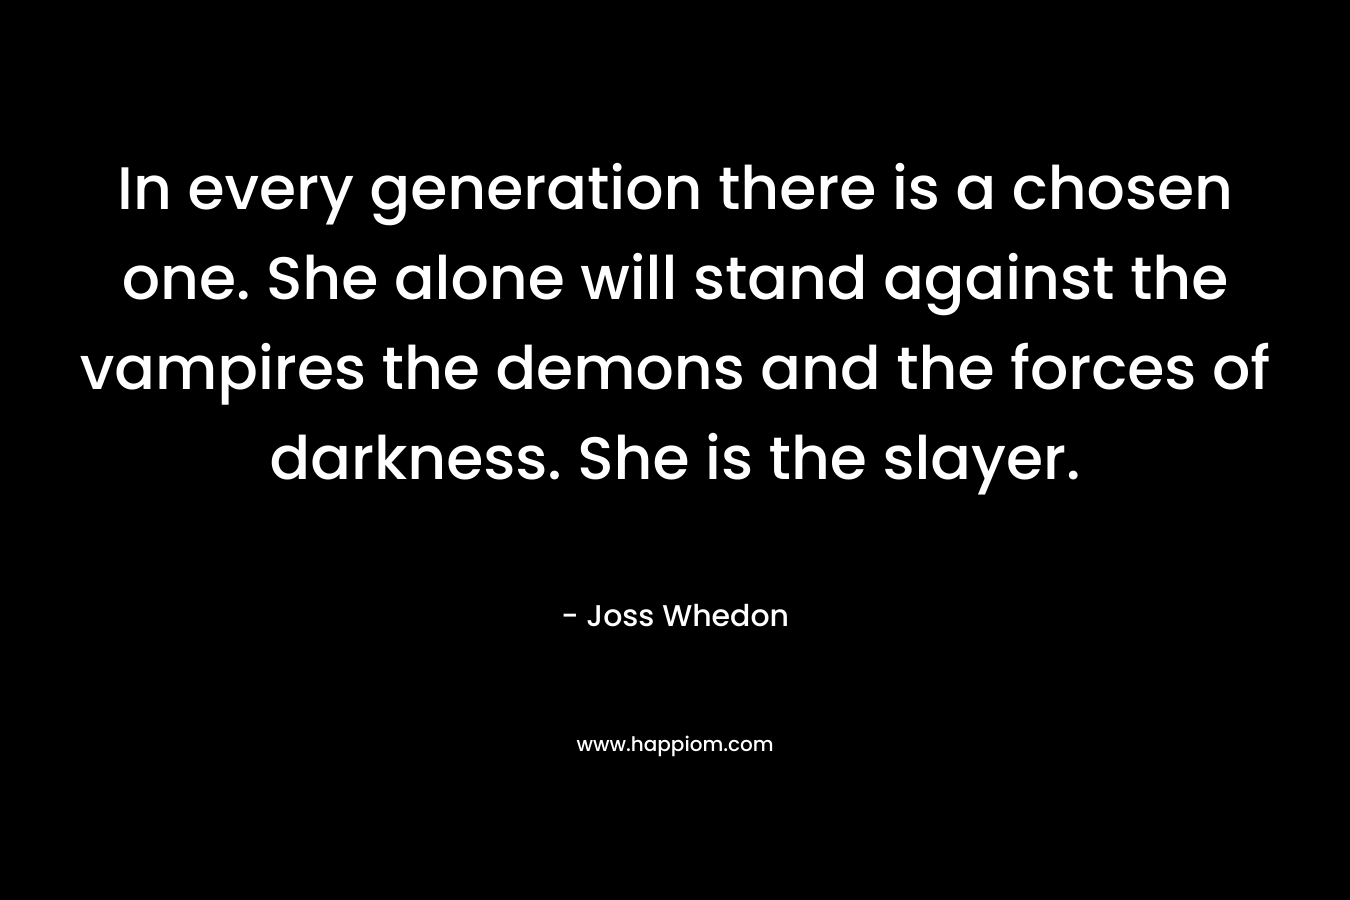 In every generation there is a chosen one. She alone will stand against the vampires the demons and the forces of darkness. She is the slayer.